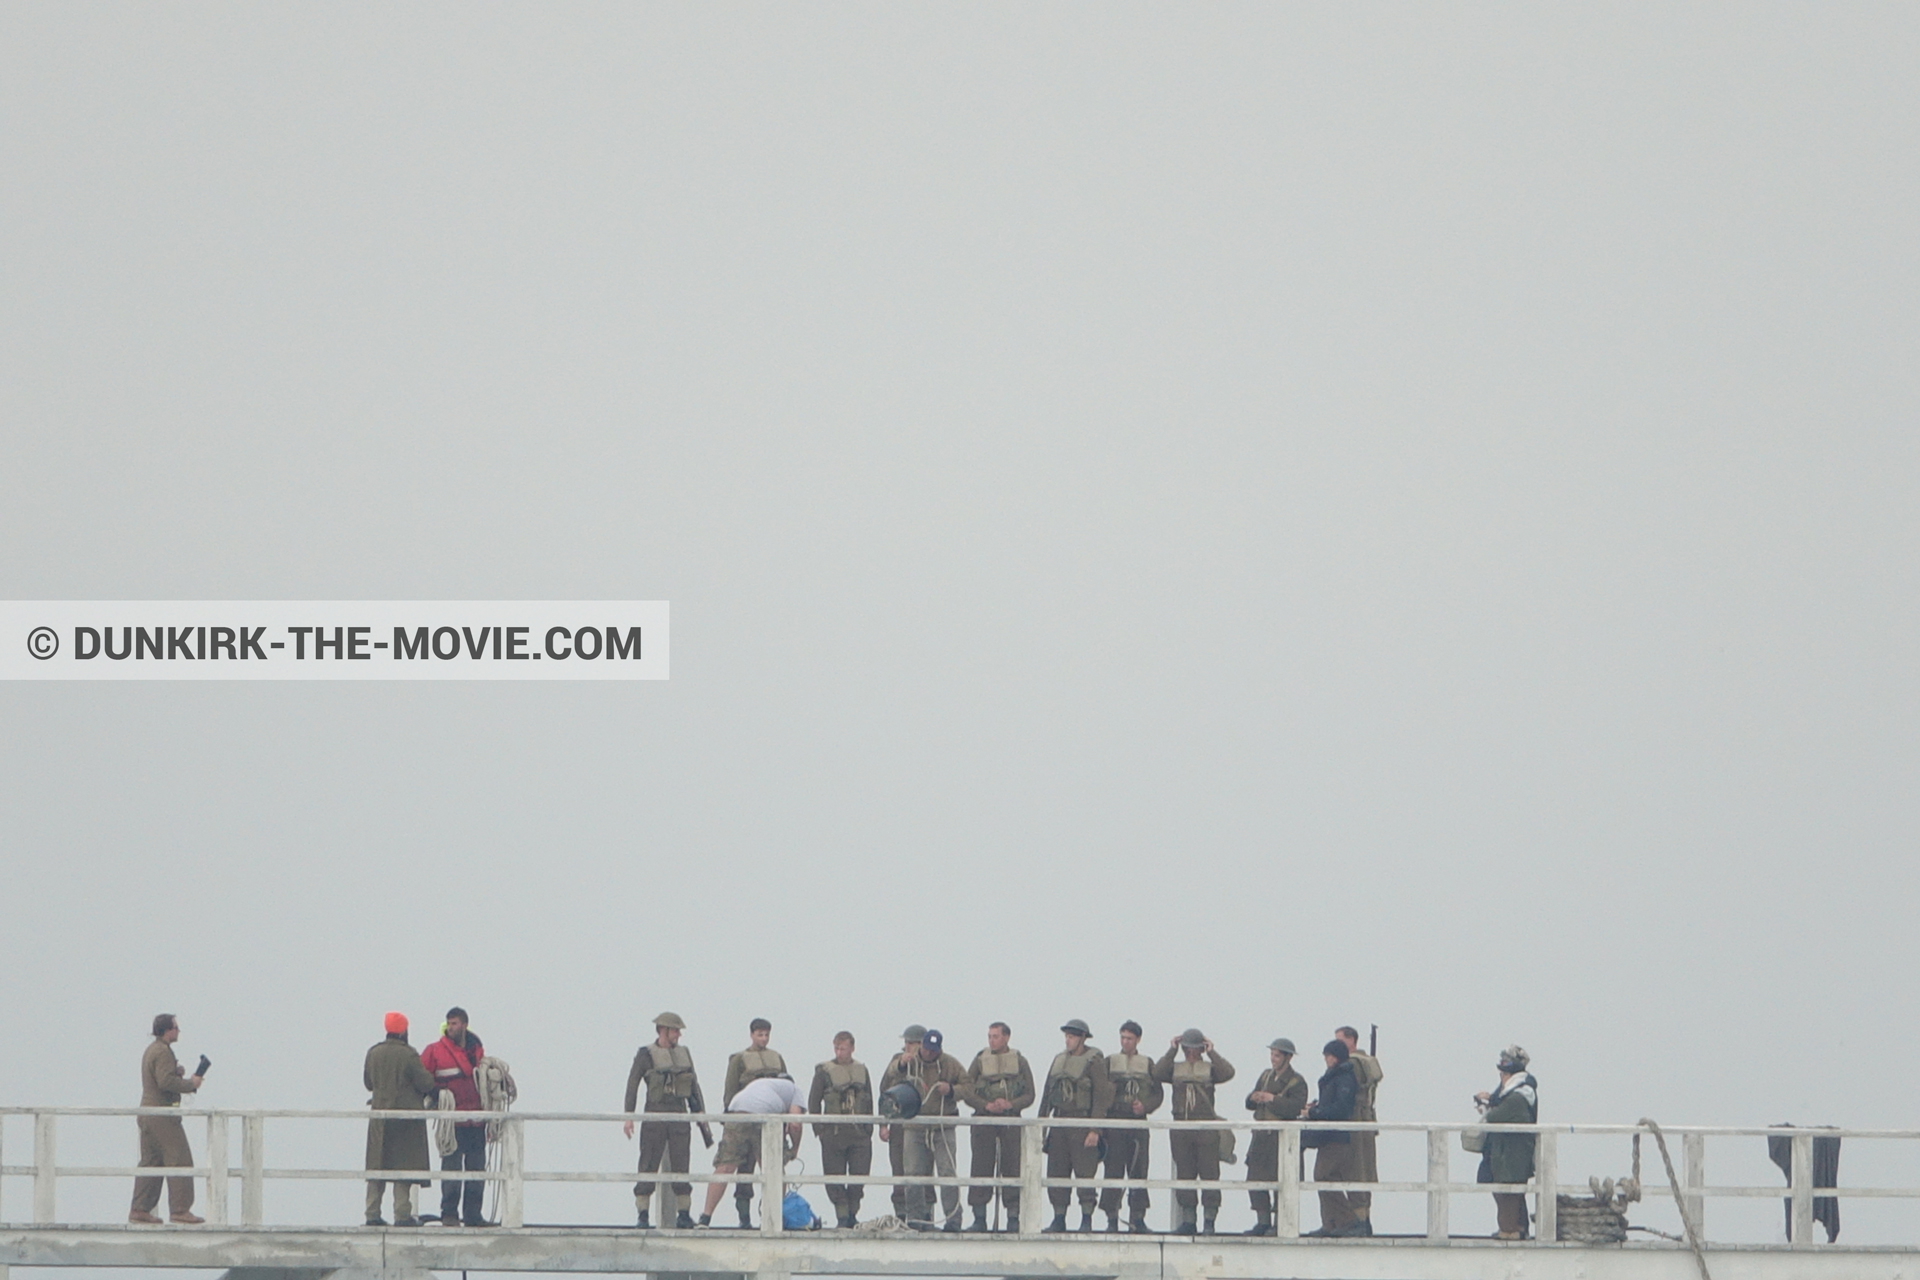 Picture with actor, grey sky, supernumeraries, EST pier,  from behind the scene of the Dunkirk movie by Nolan